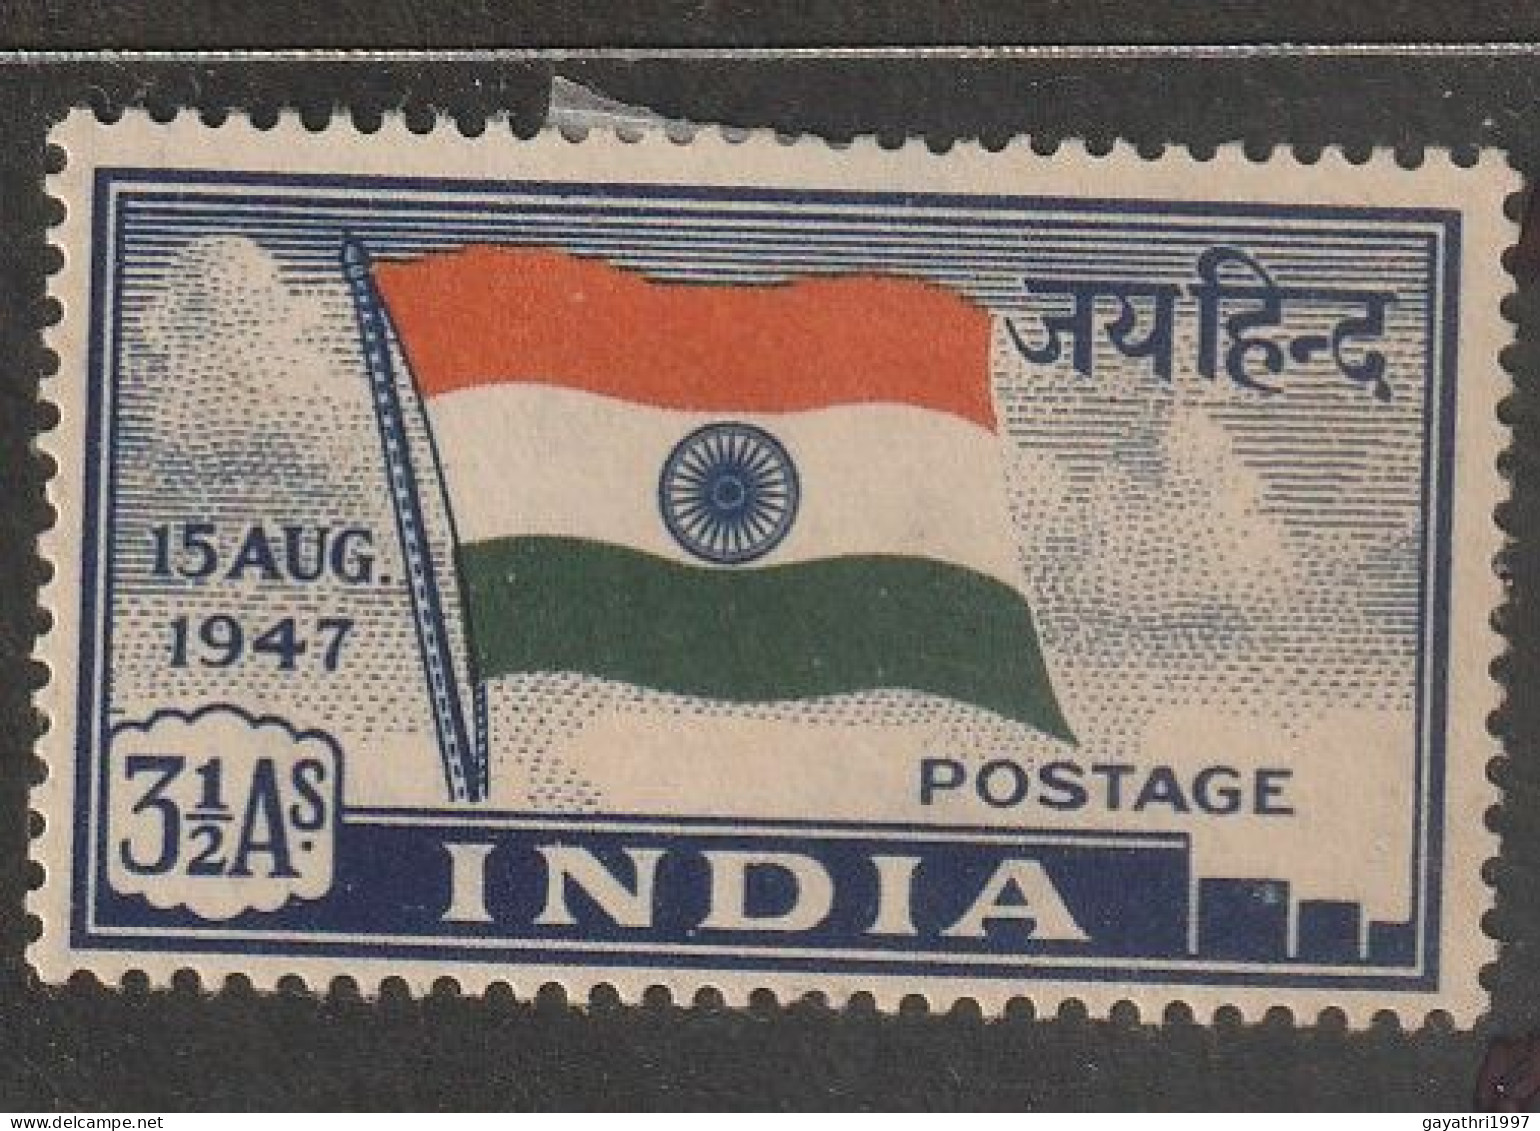 India ;Indian National Flag.  3 Stamps  ERRORS  1 WATERMARK INVRTETED (USED, FULL CANCELATION ) 2. SMUGED PRINT - Errors, Freaks & Oddities (EFO)